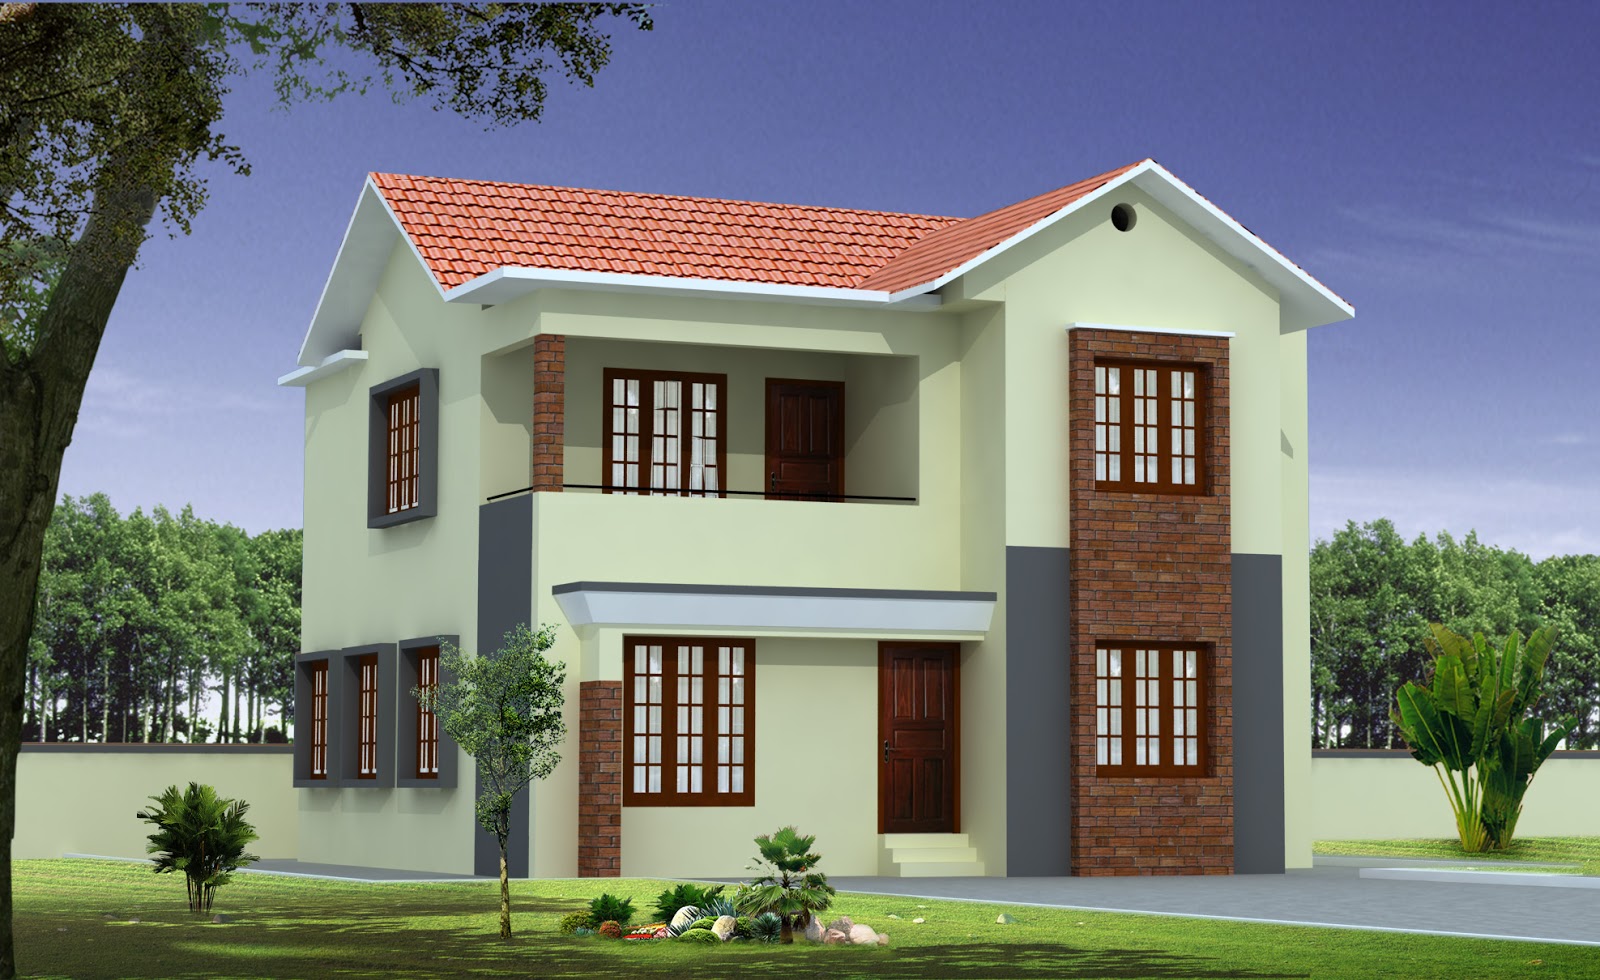 Home Construction Designs Build A Building Latest Home Designs On Home